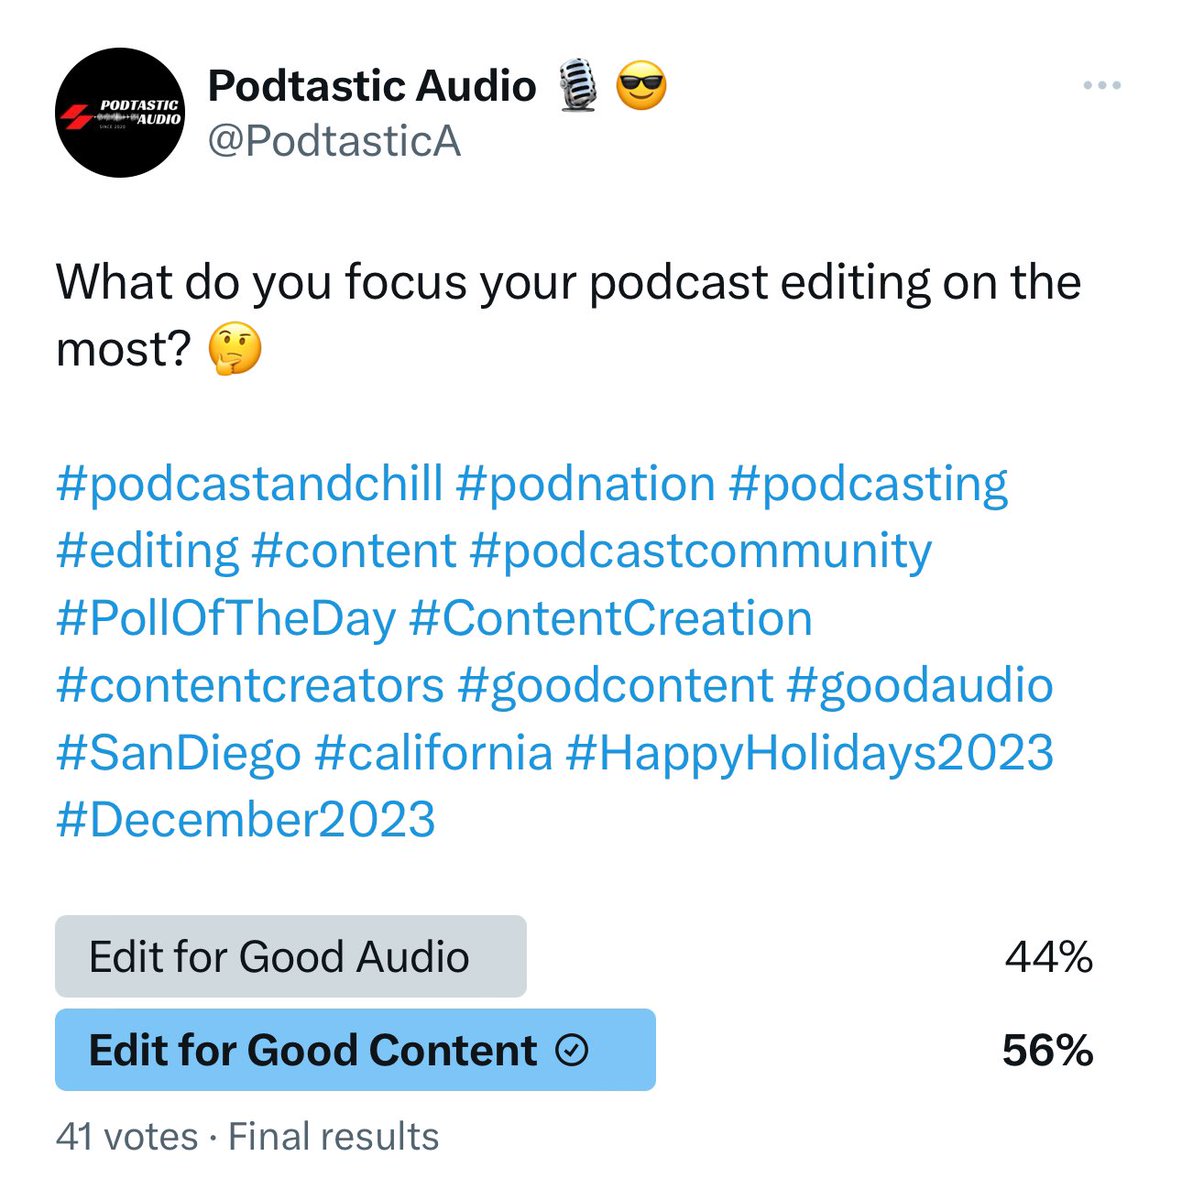 Close vote, but content is King. 

The correct answer is both 👍

Good Content + Good Audio = Amazing!

#PodcastWeekend #podnation #podernfamily #podcasts #podcast #ContenCreation #goodcontent #goodaudio #audiophile #audio #fun #SaturdayMood